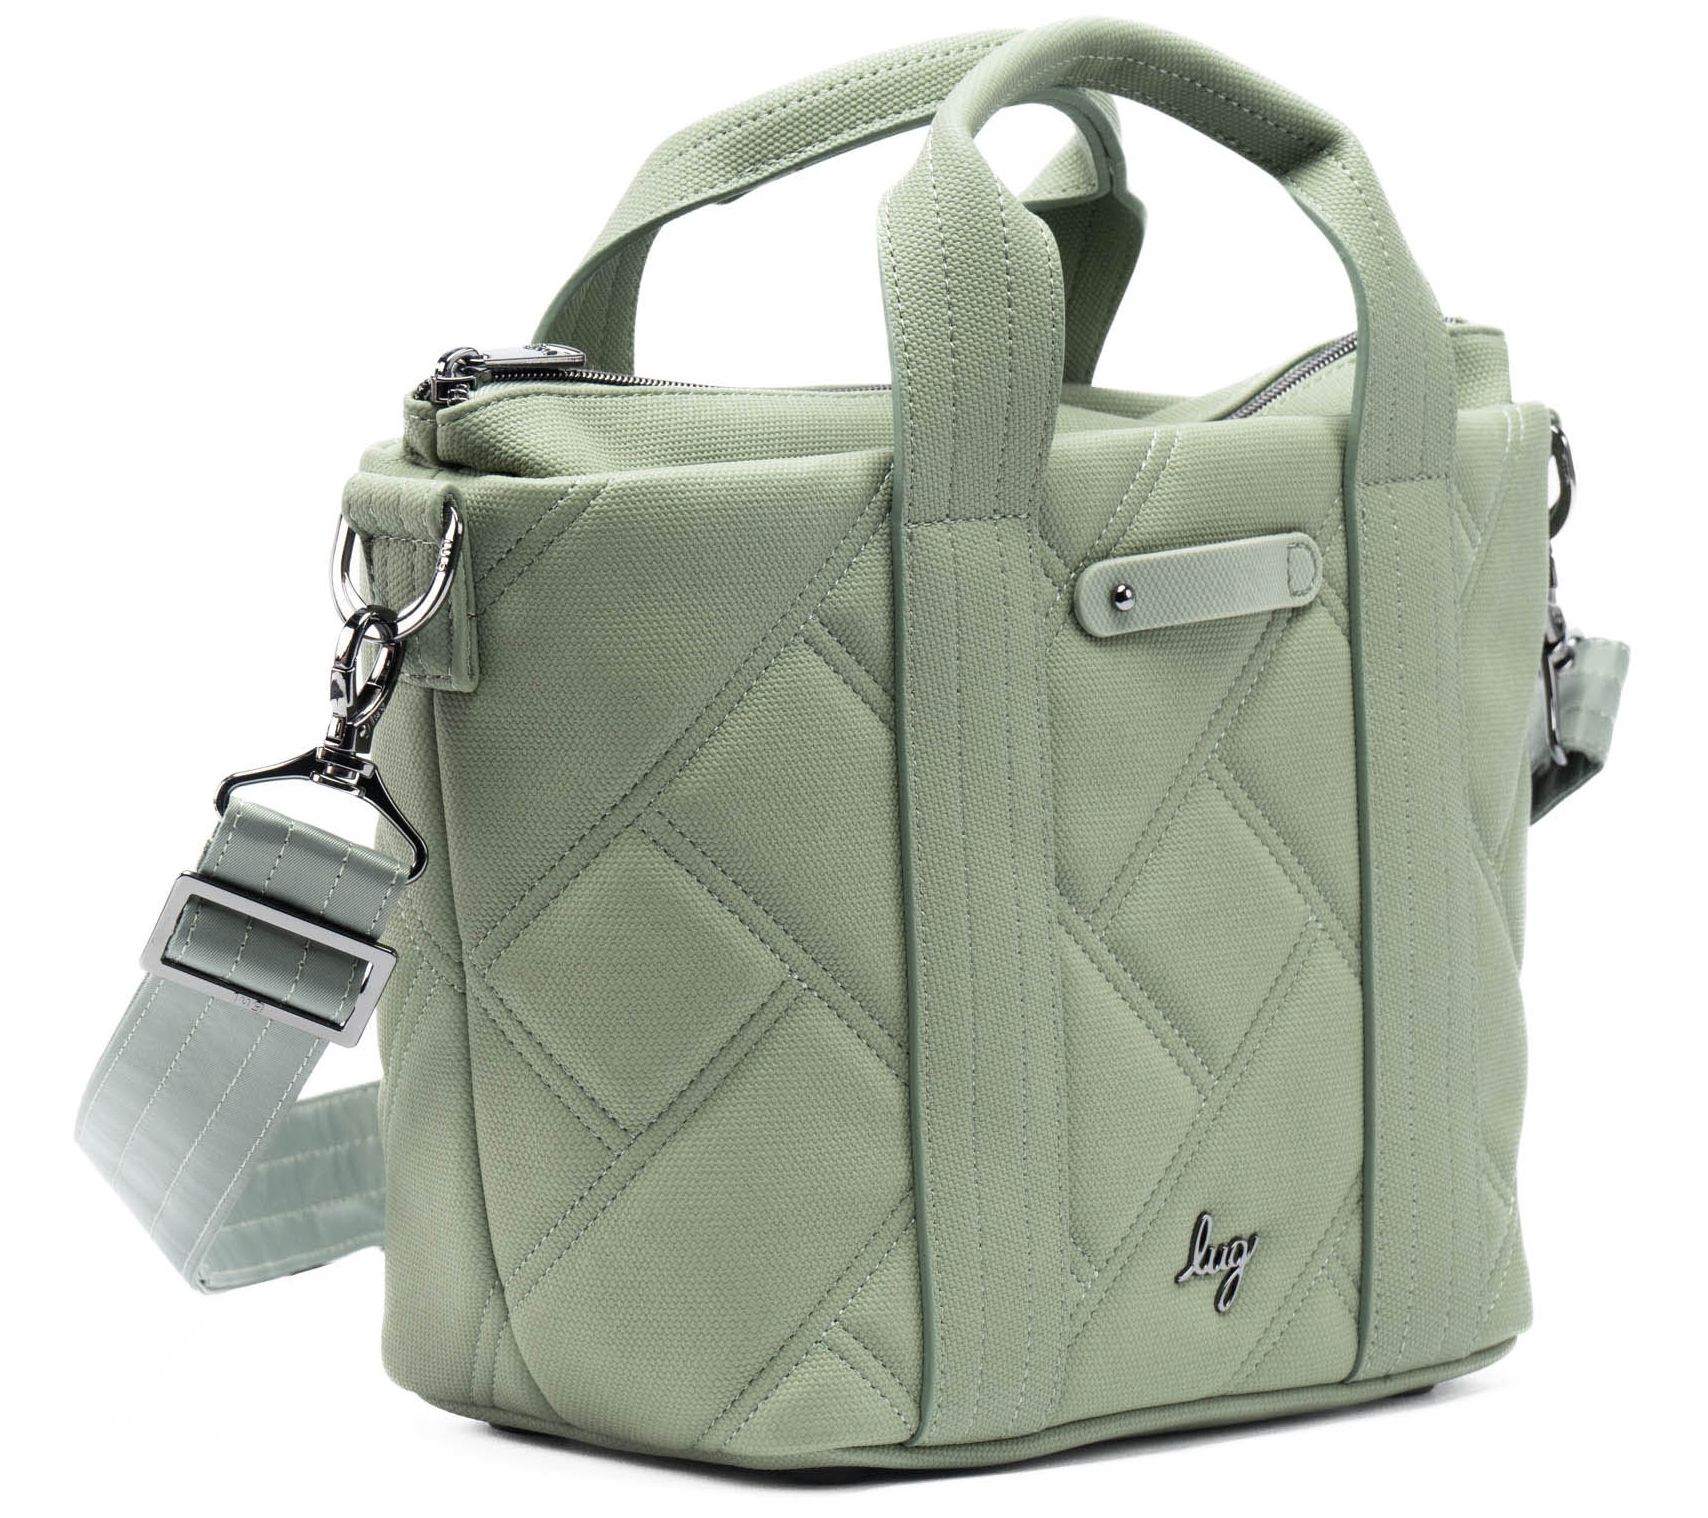 Lug Matte Luxe Crossbody with Tote Handles - Dory Medium